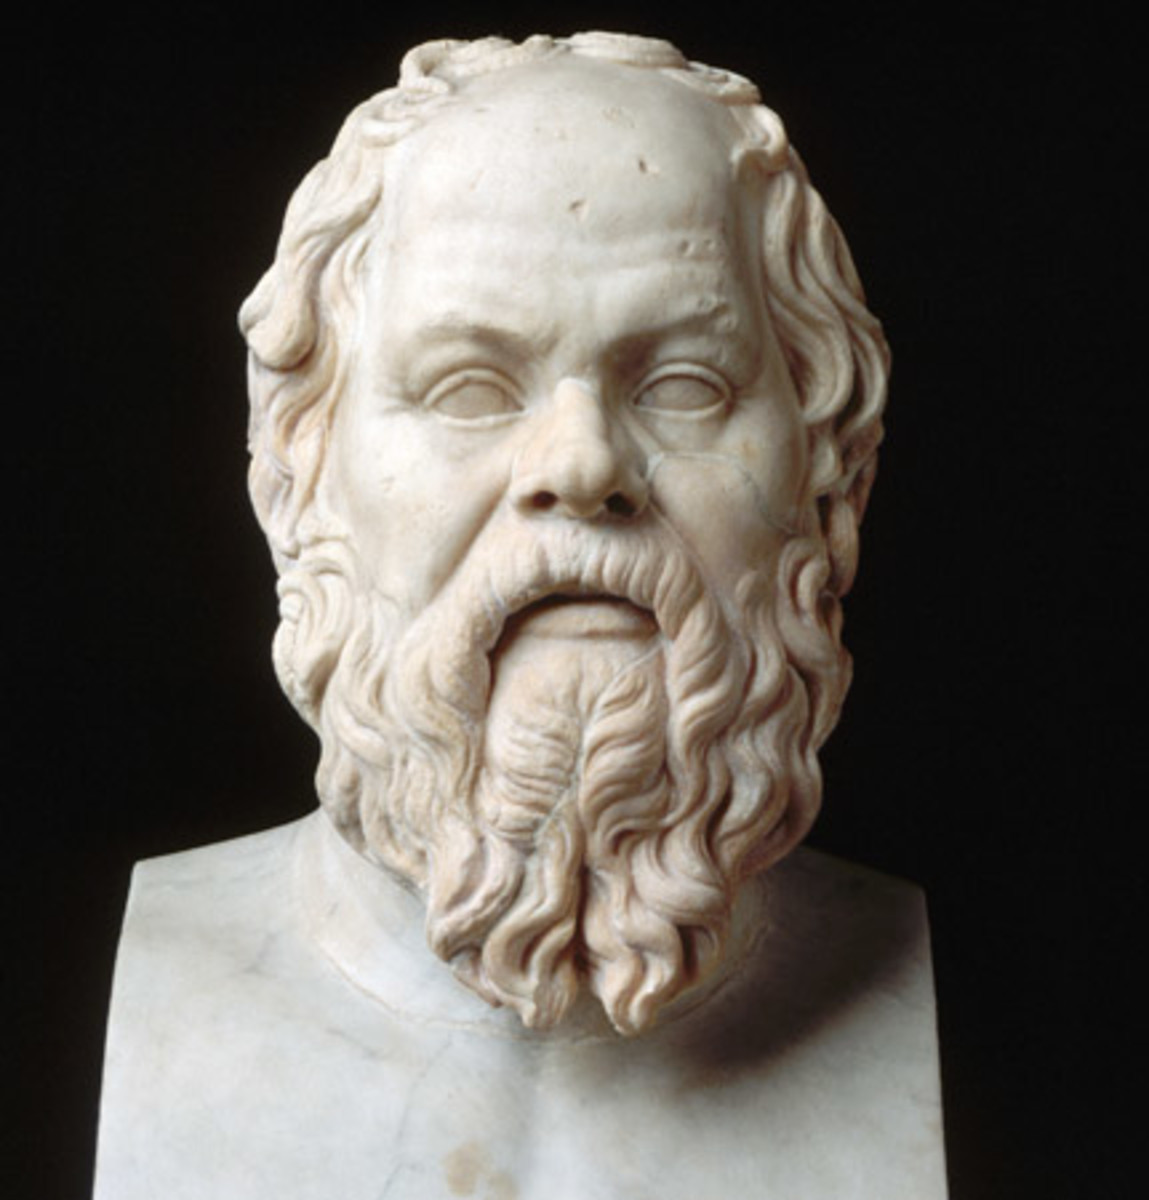 Socrates introduced a newfound means of explaining truth, morality, and justice.